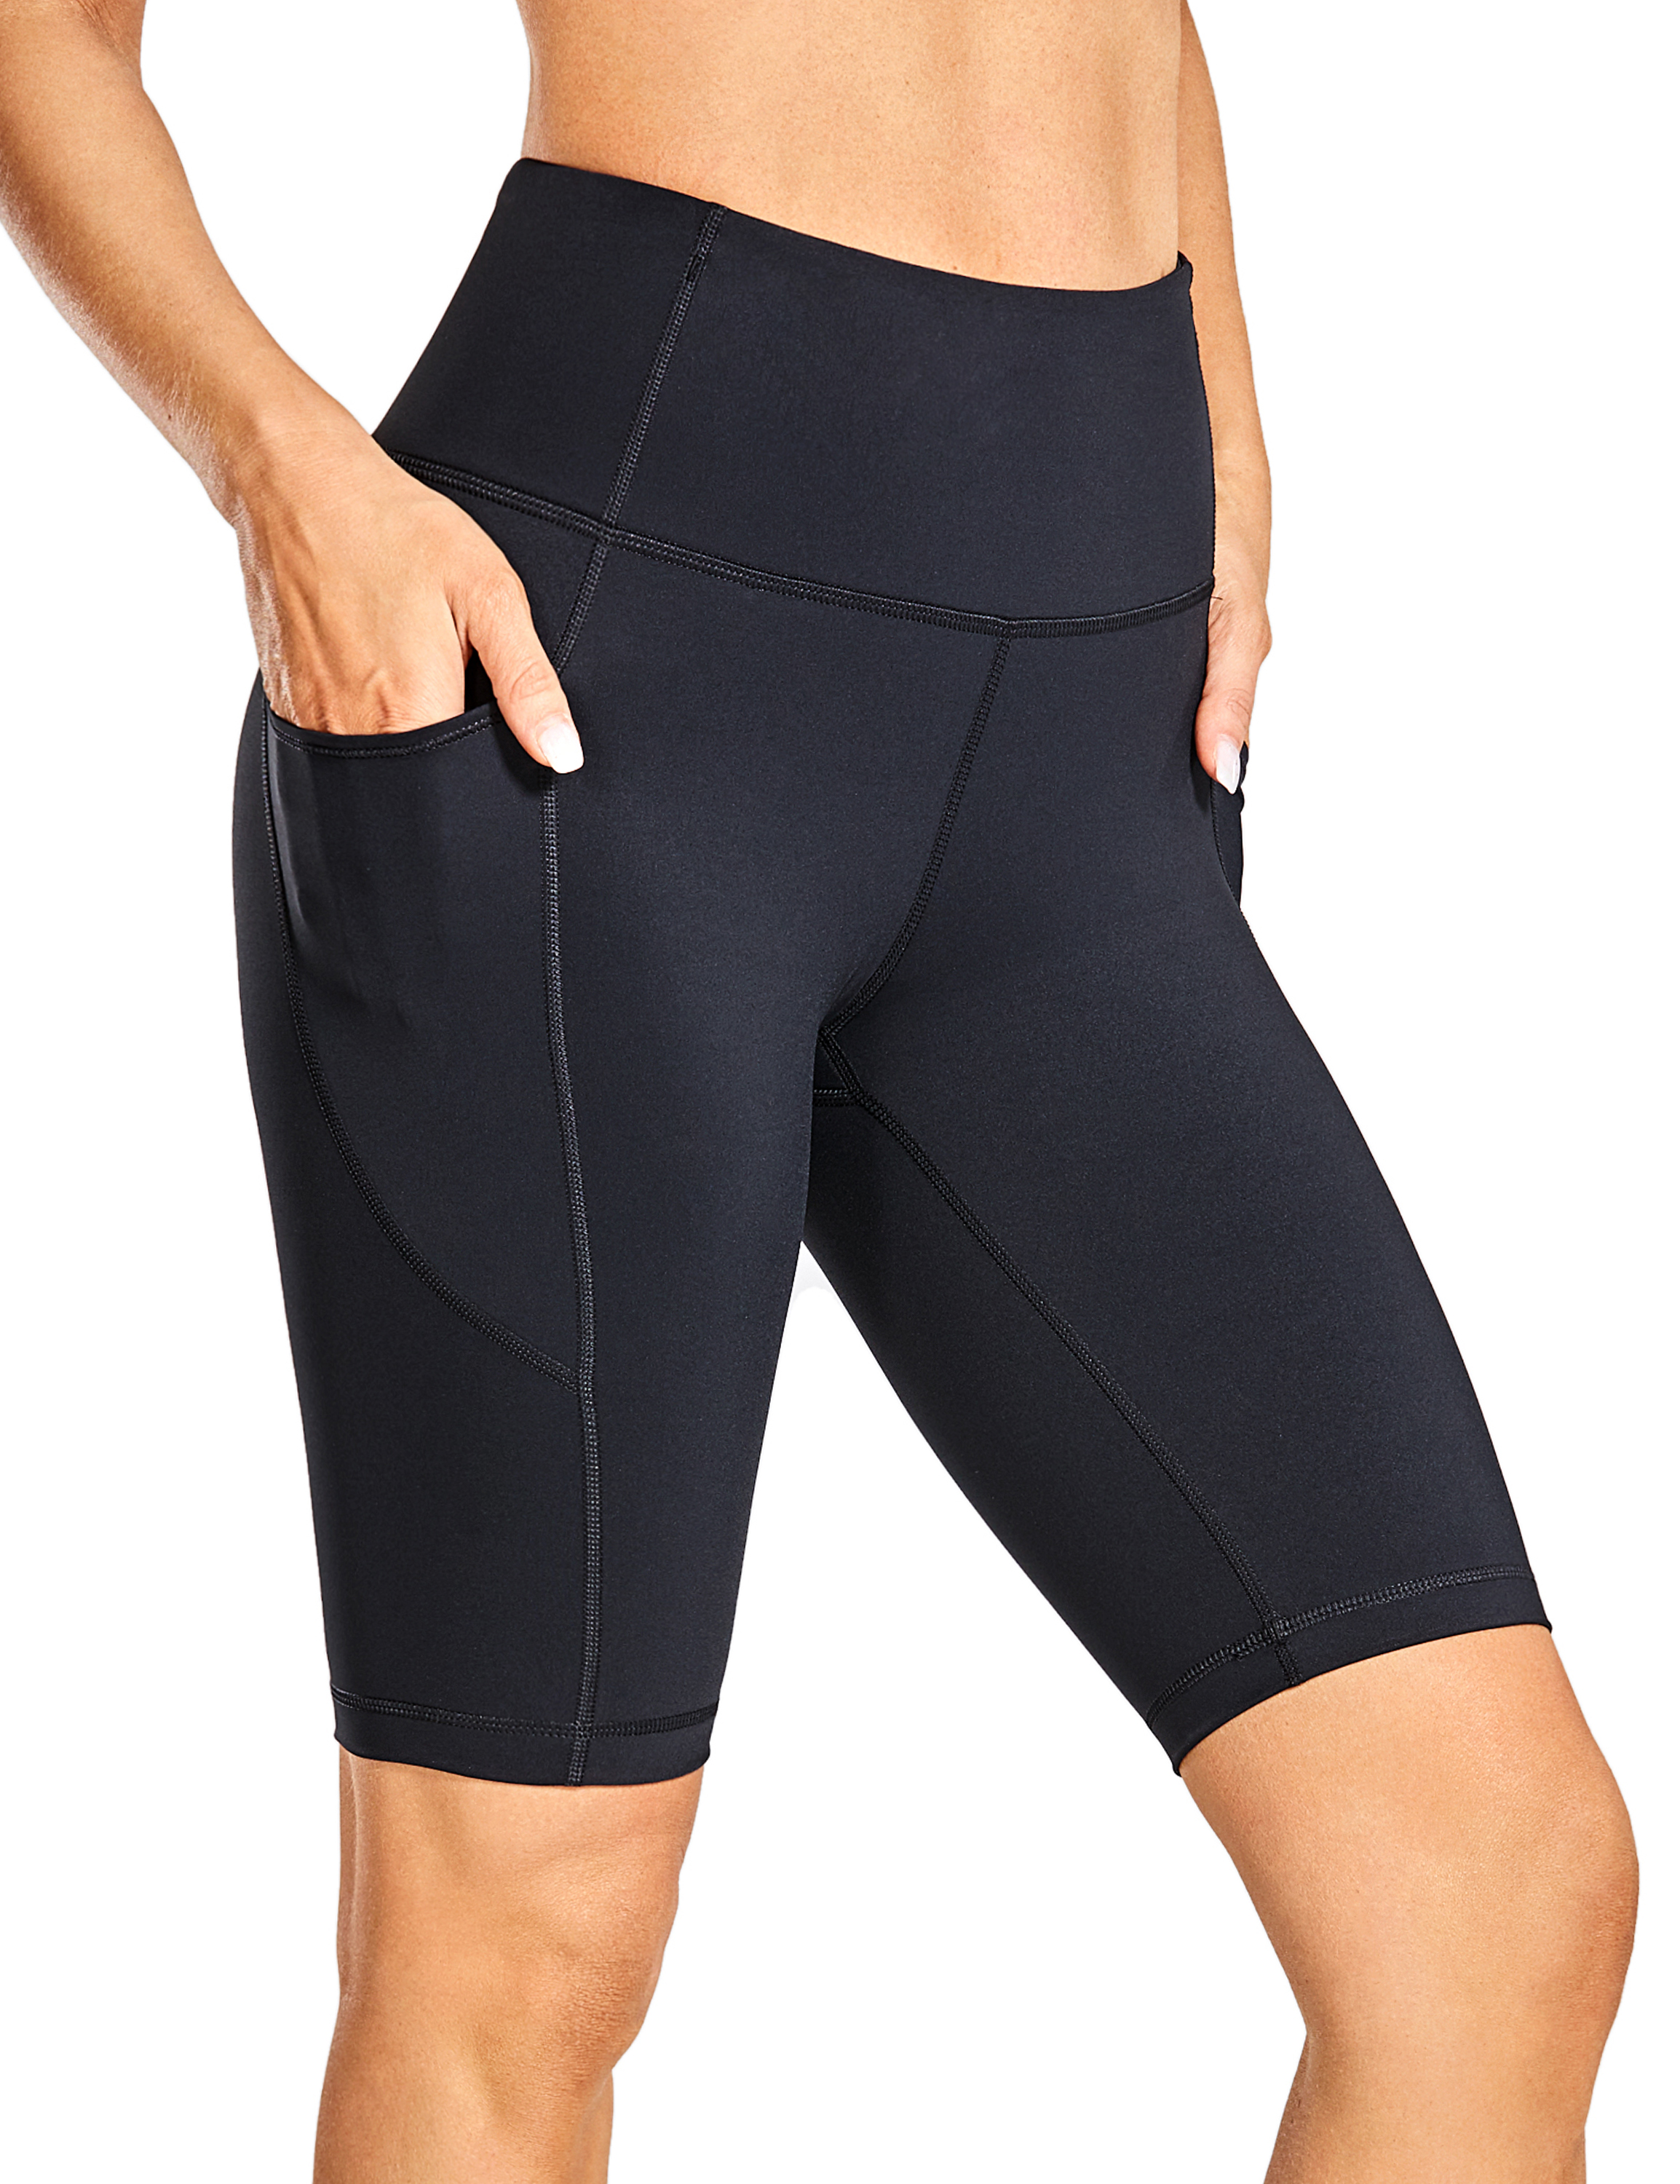 CRZ YOGA Women's High Waist Biker Workout Athletic Shorts with Pockets-  10Inches | eBay